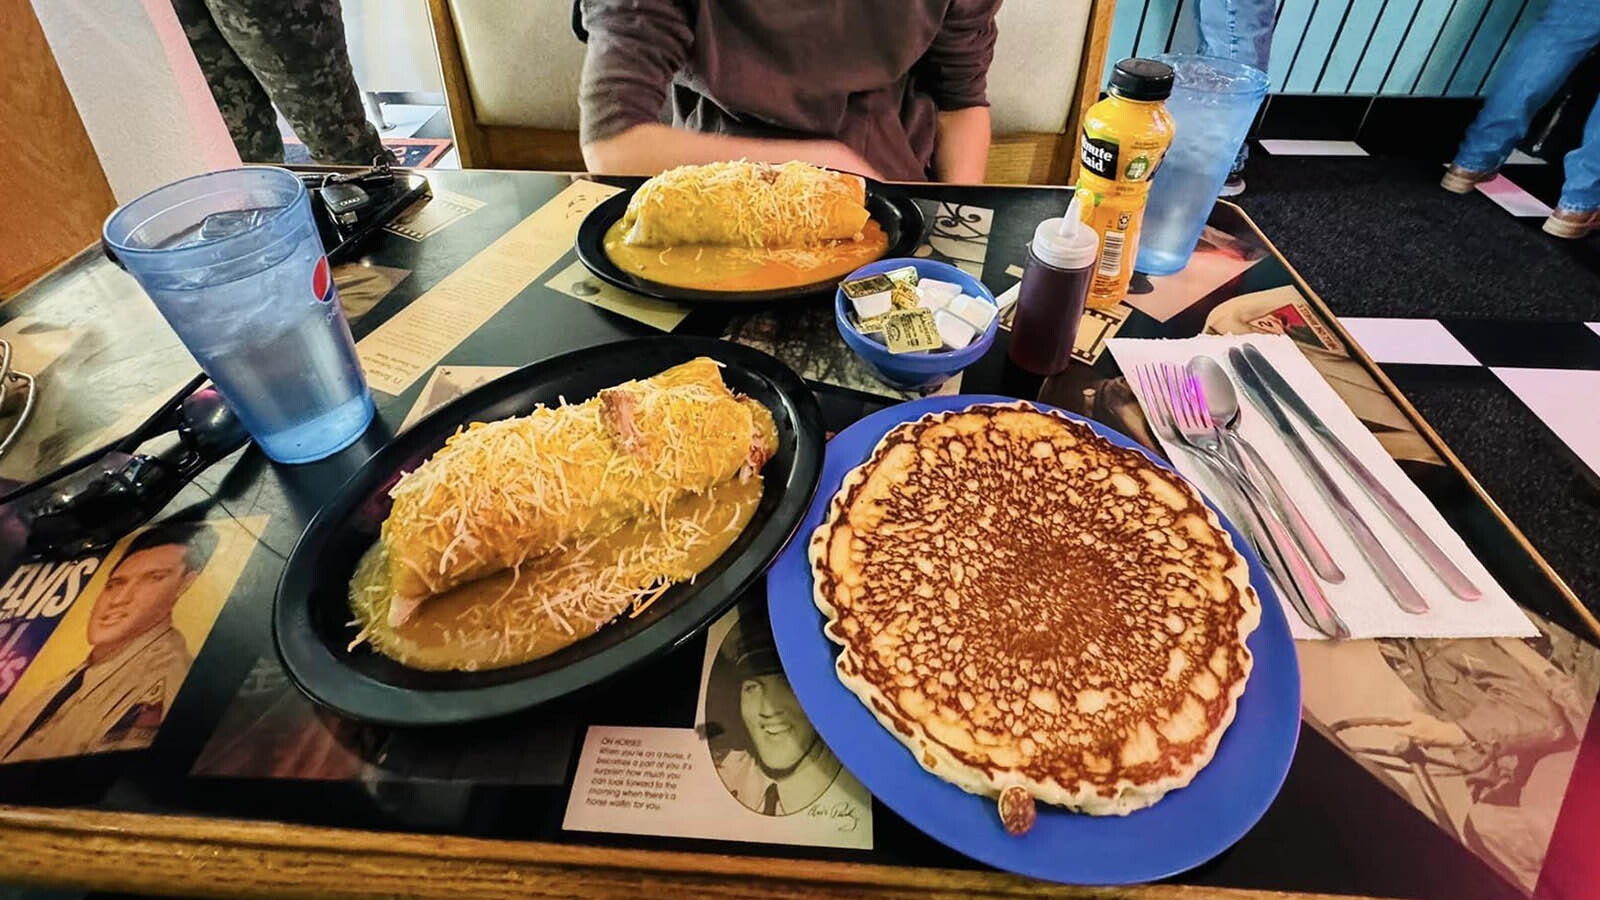 The R&B Breakfast Club is known for its Elvis theme and King-sized portions.